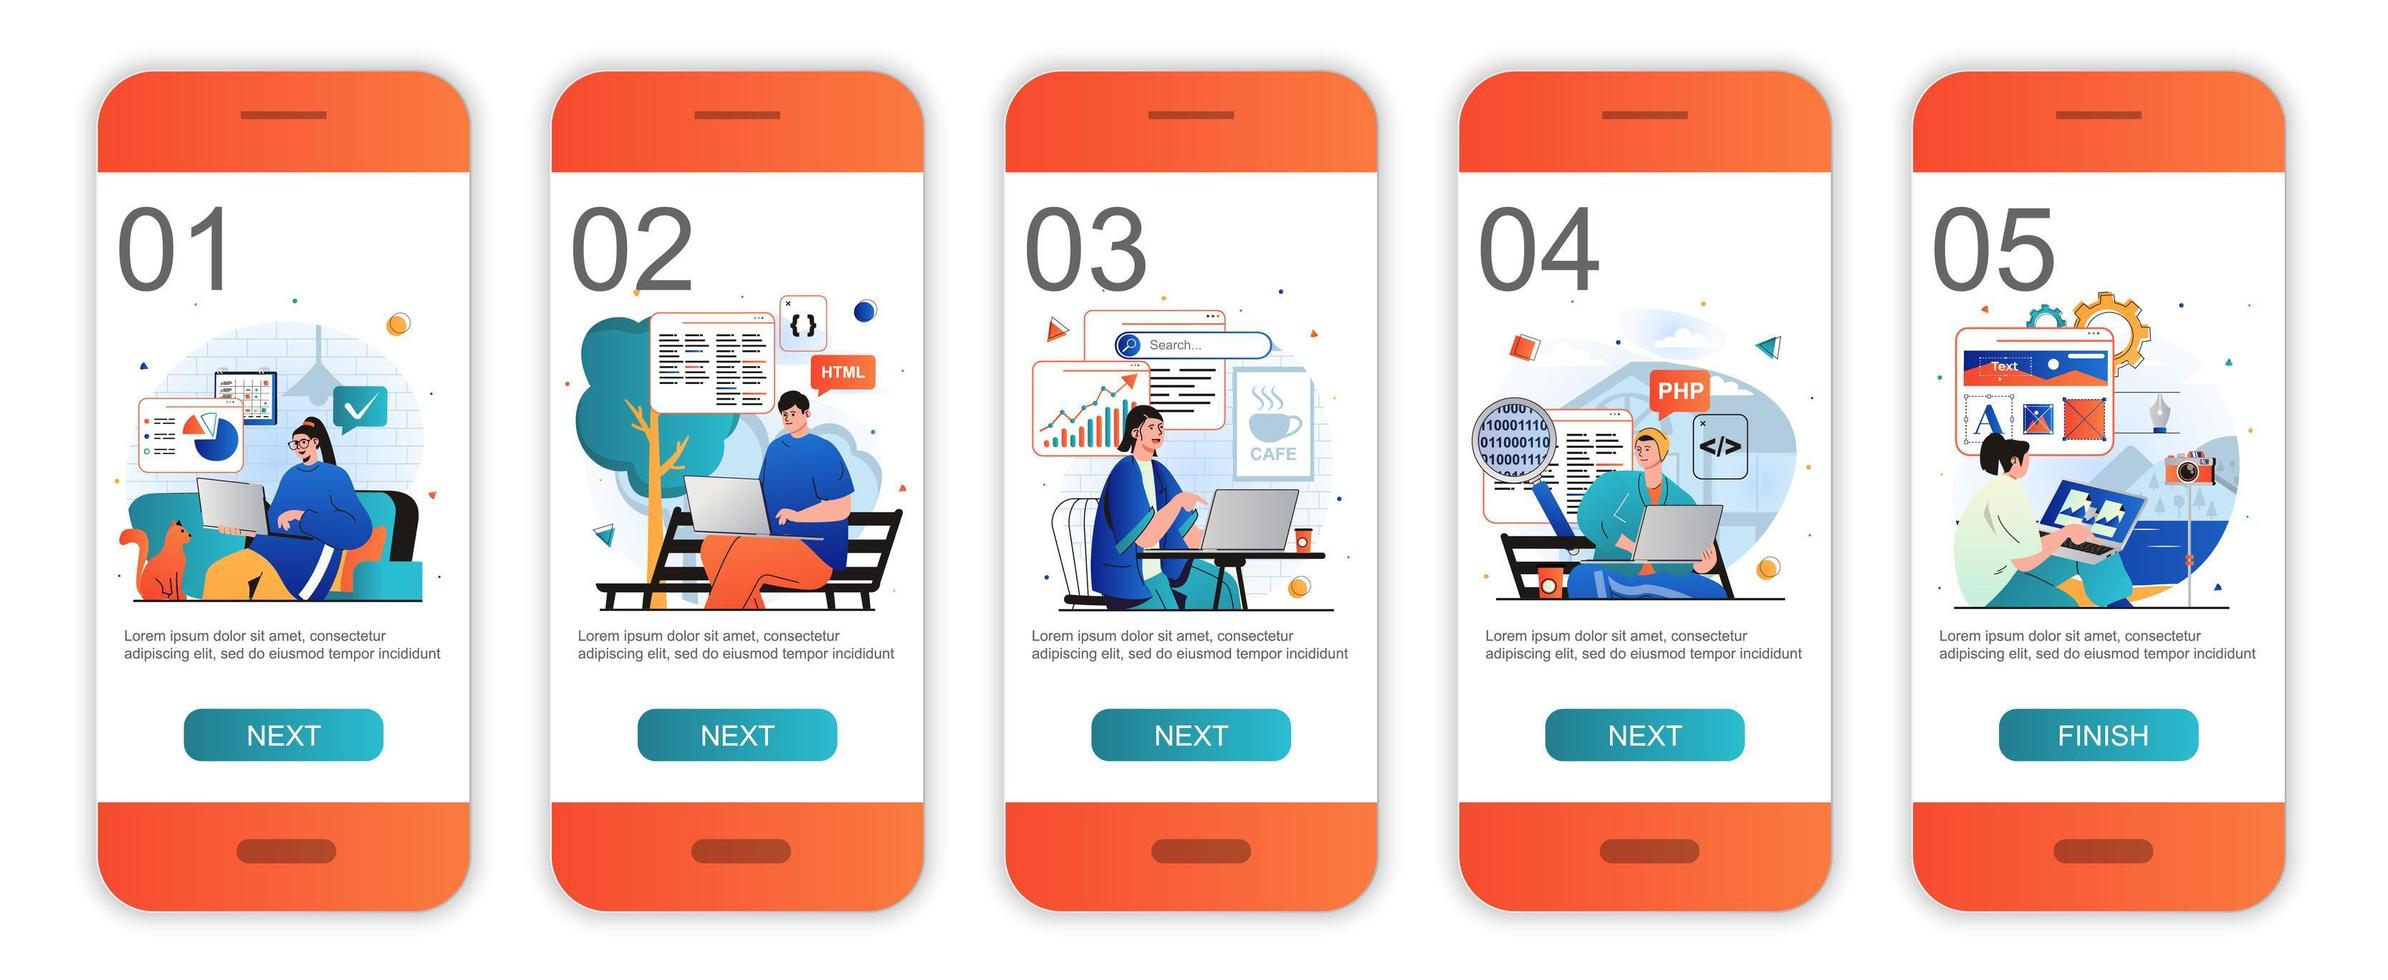 Freelance working concept onboarding screens for mobile app templates. Freelancers with laptops. Modern UI, UX, GUI screens user interface kit with people scenes for web design. Vector illustration